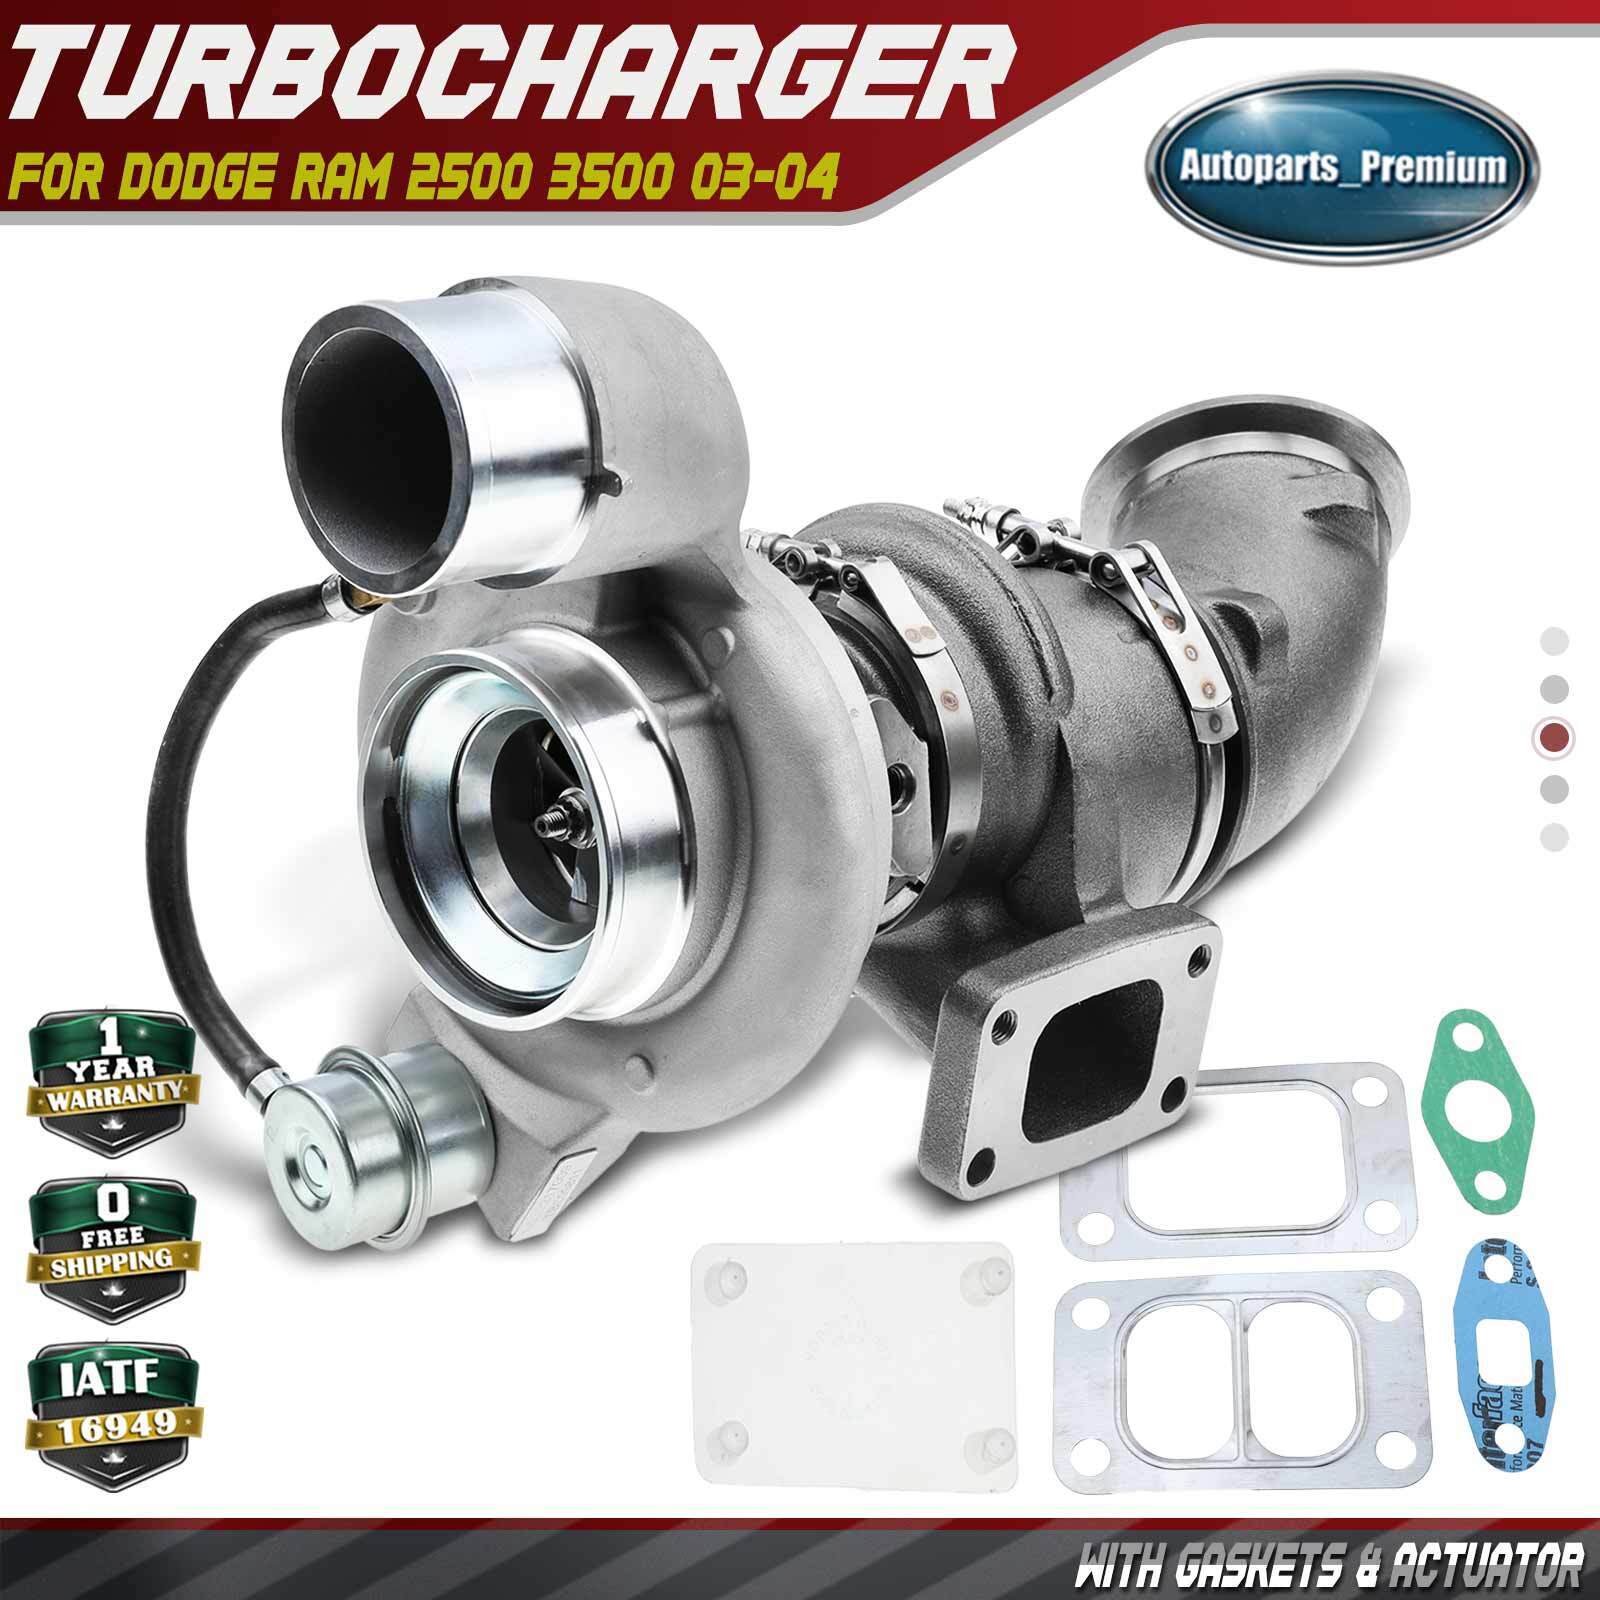 Turbo Turbocharger w/ Gaskets & Actuator for Dodge Ram 2500 3500 2003-2004 5.9L